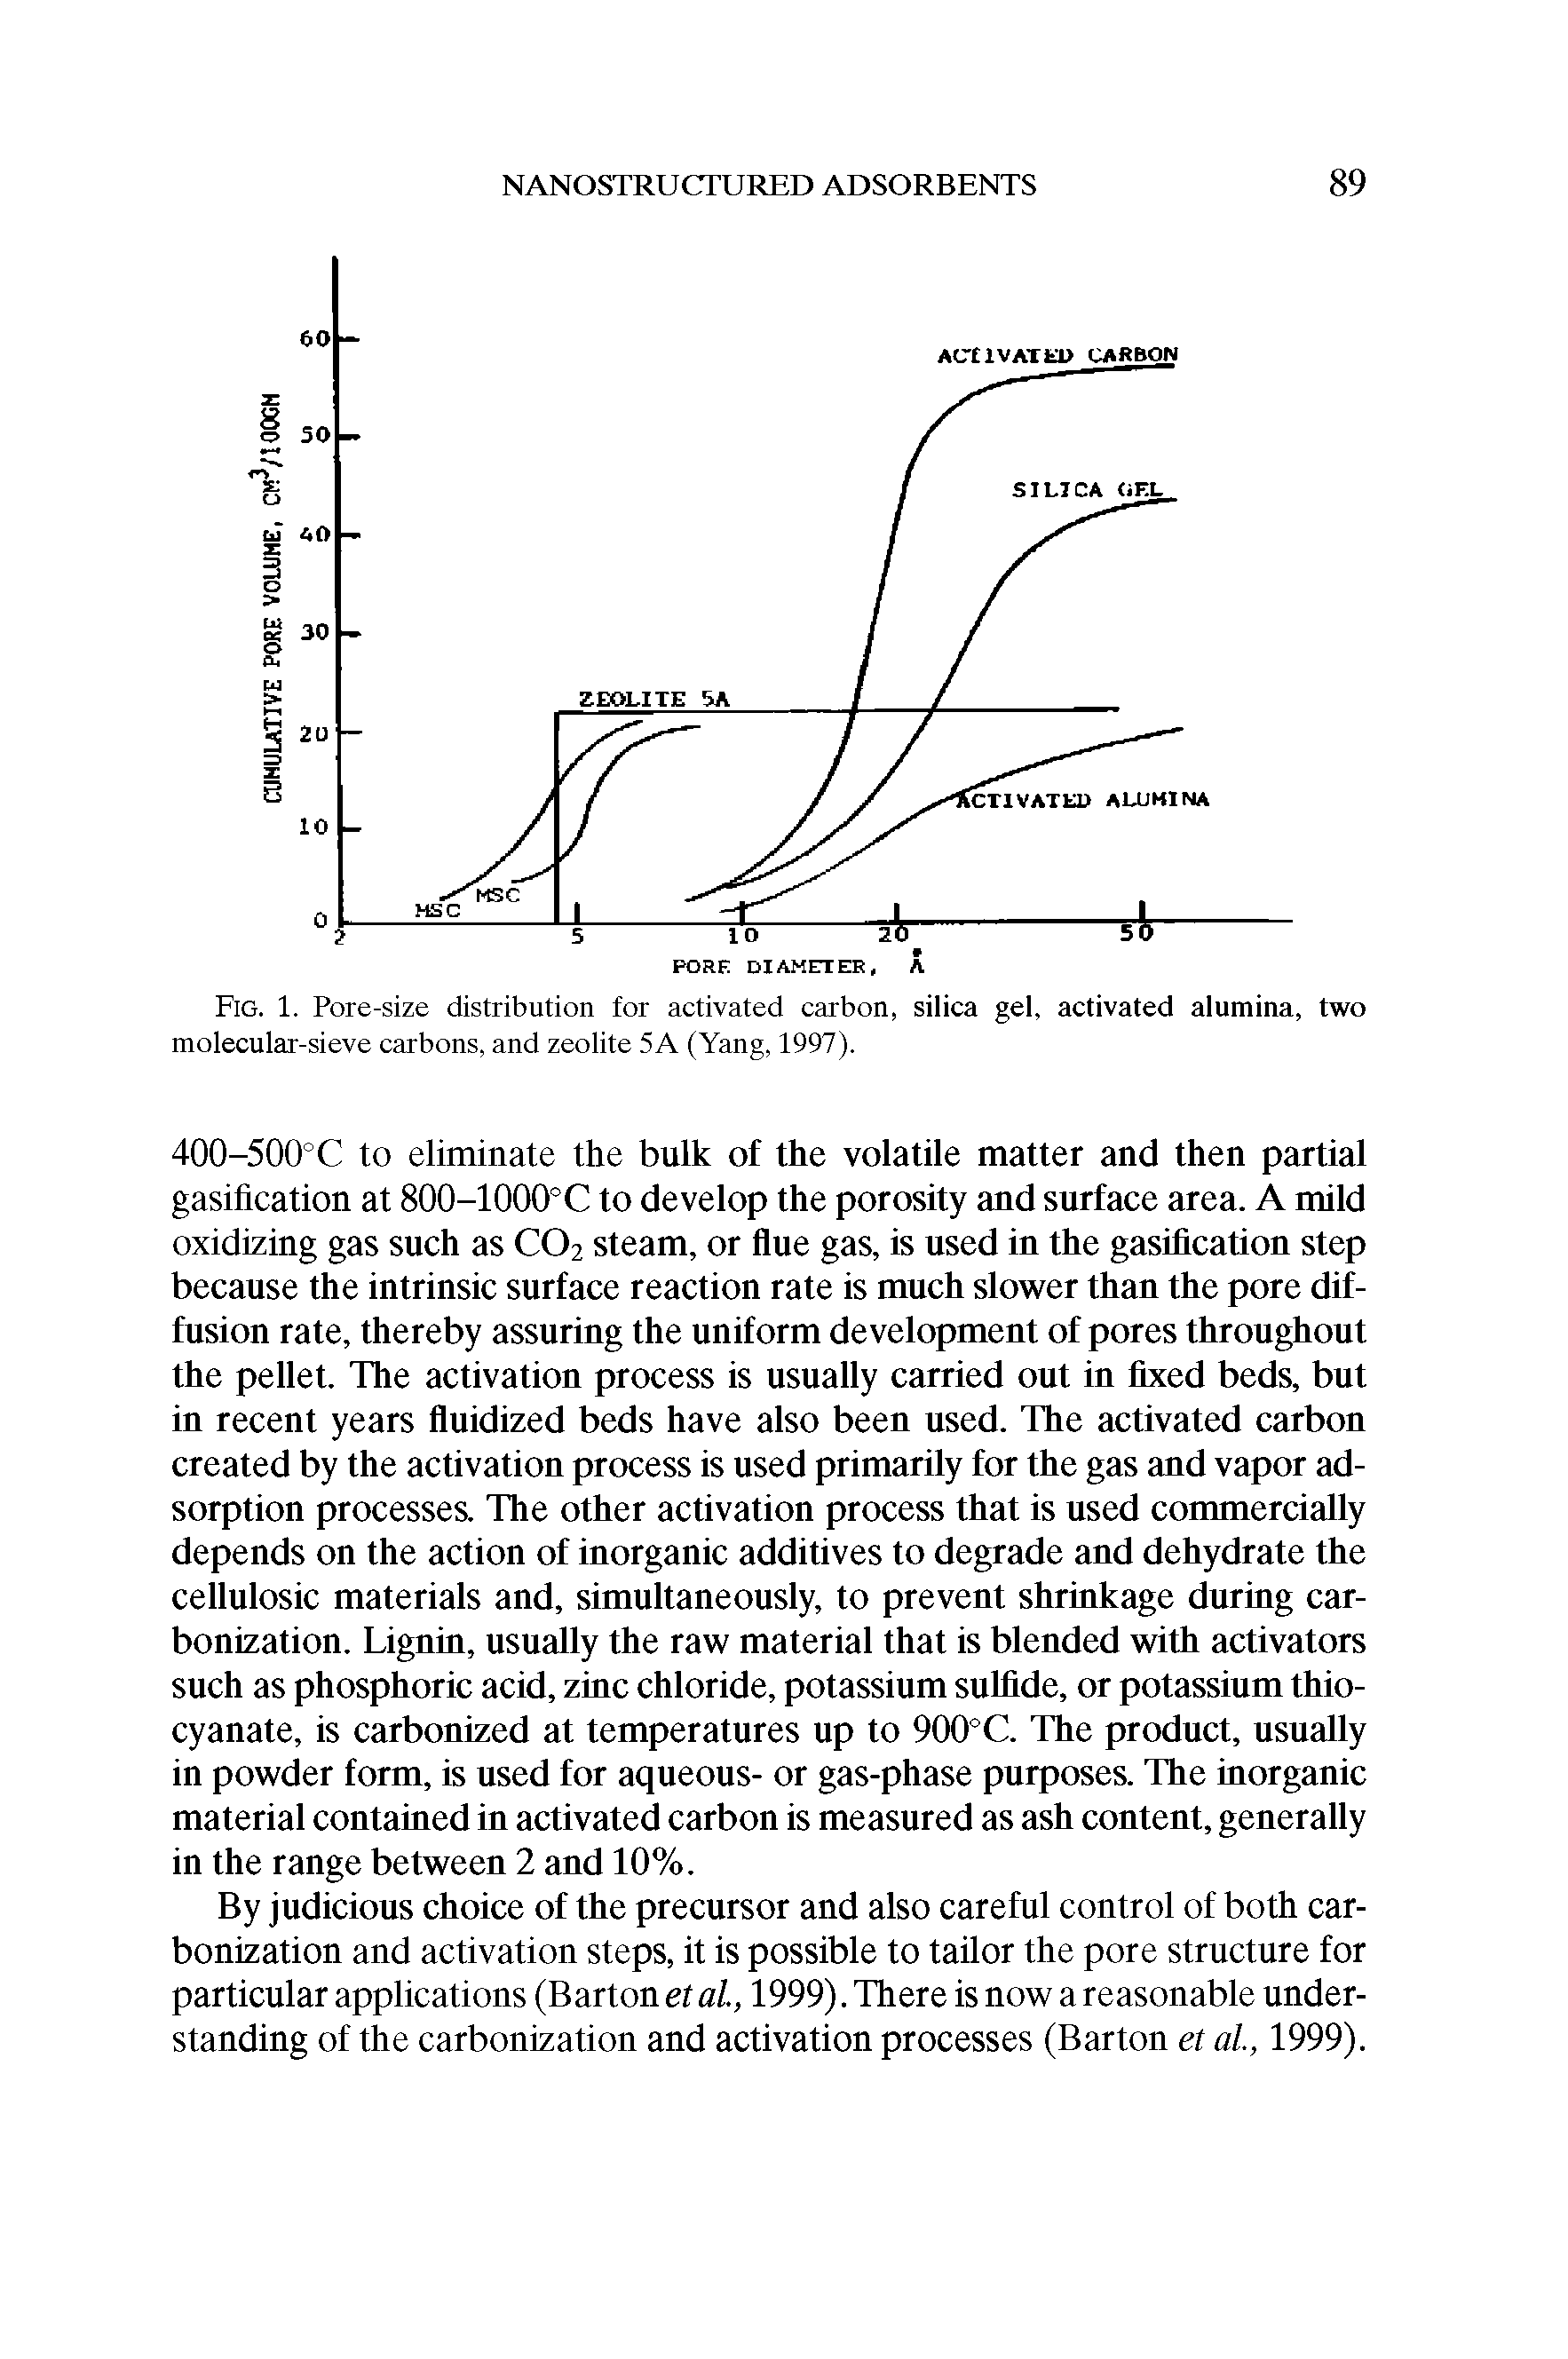 Fig. 1. Pore-size distribution for activated carbon, silica gel, activated alumina, two molecular-sieve carbons, and zeolite 5A (Yang, 1997).